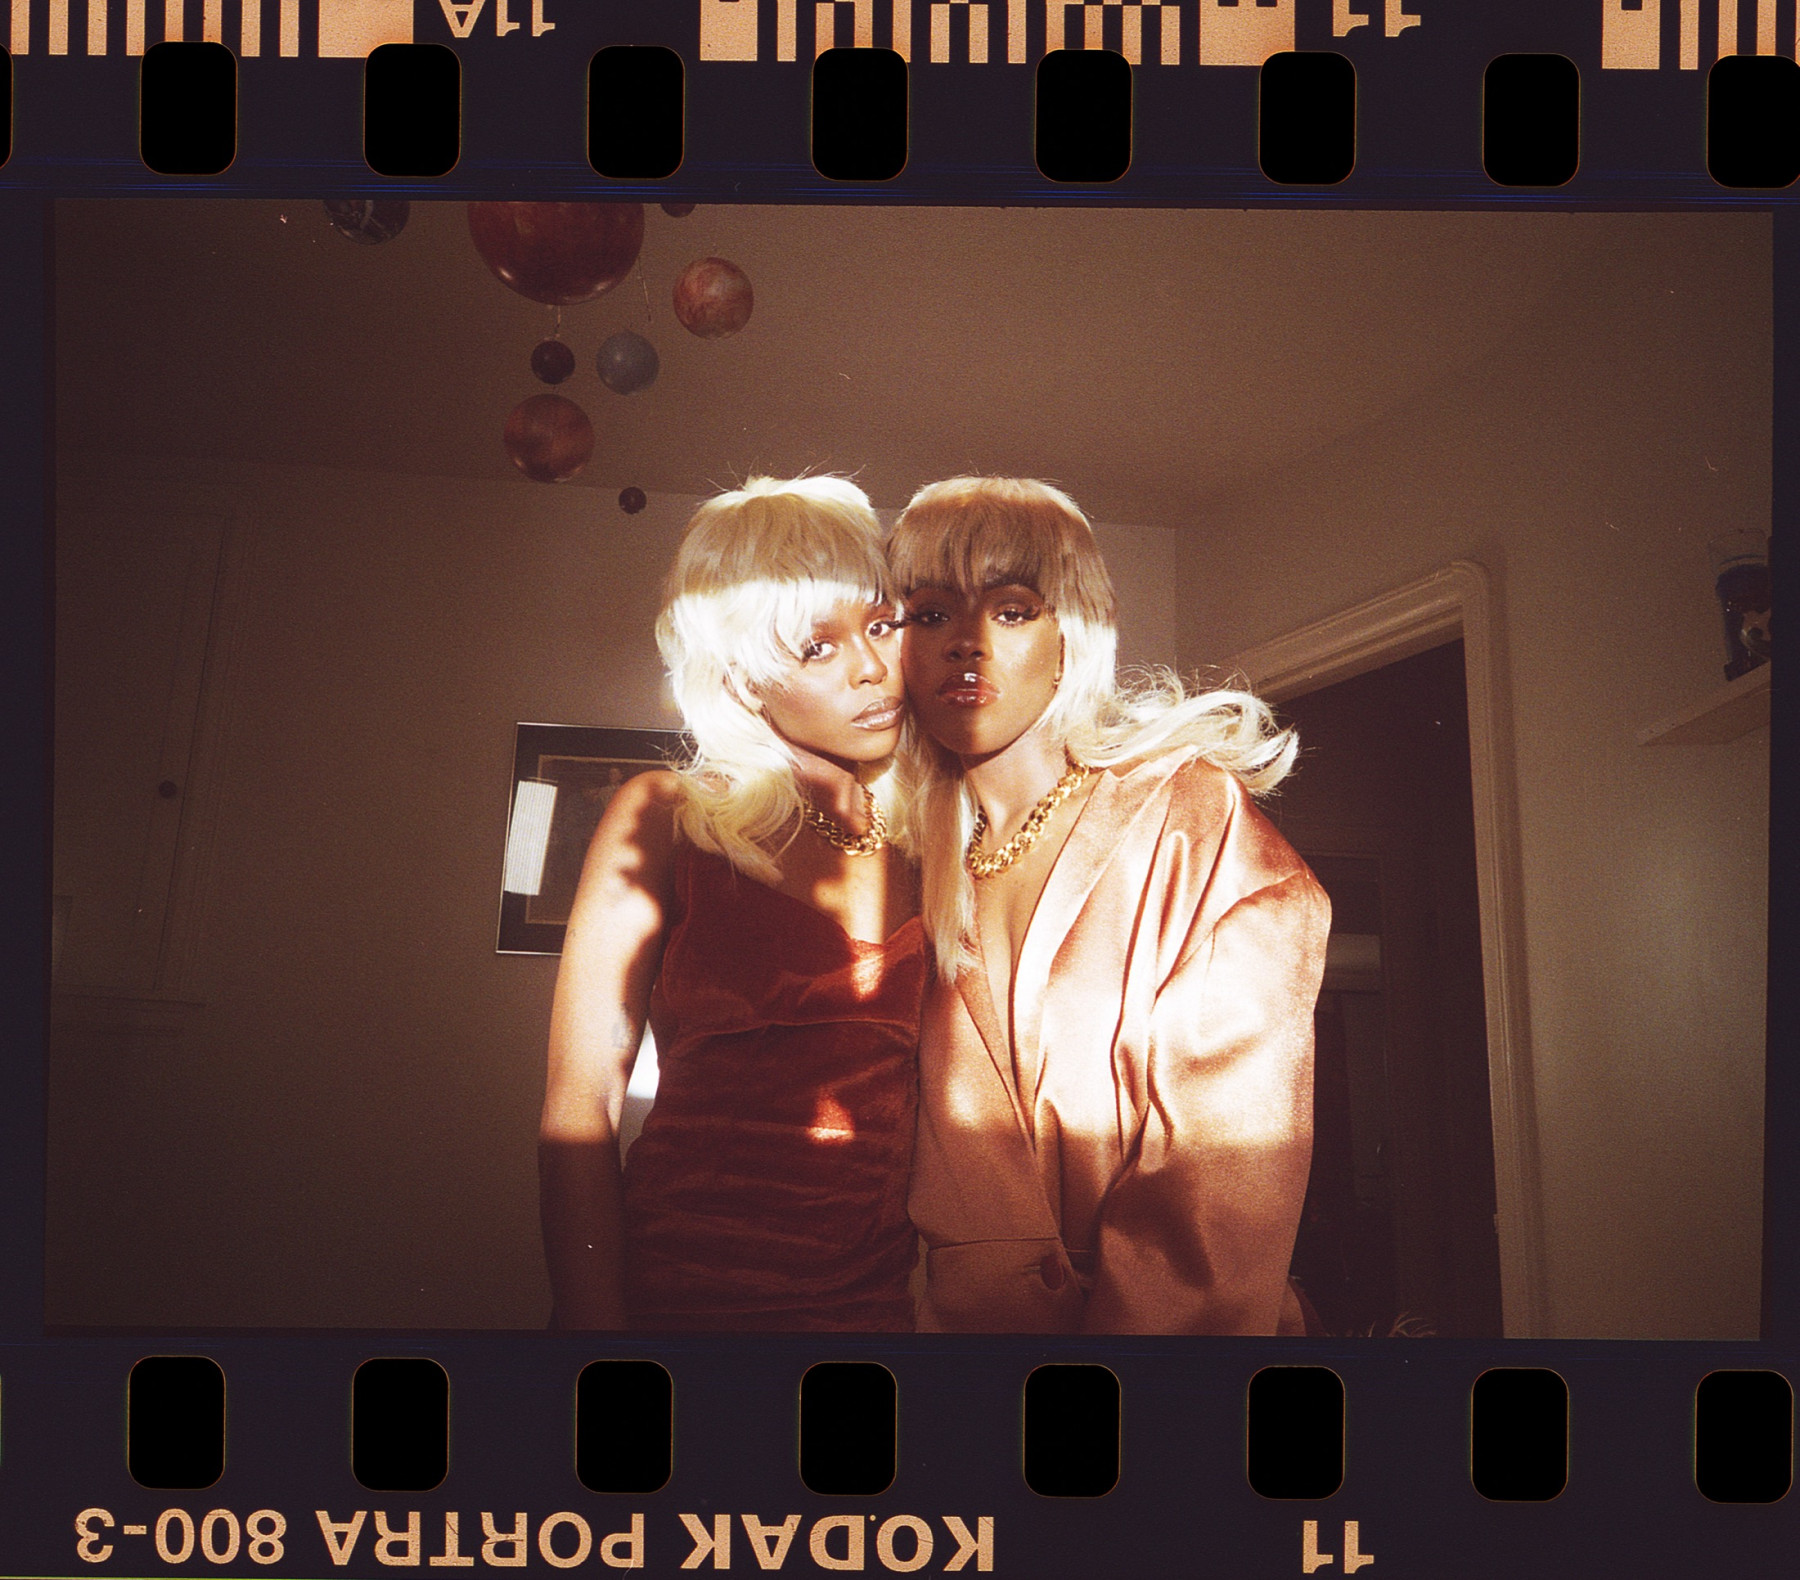 A photograph of two Black women and twin sisters, Kakra & Penny, embracing each other while dressed in matching blond mullets & gold chains. One wears a brown satin dress while the other wears an oversized champagne blazer; light shines brightly through the window on both of their faces as they look straight to camera.